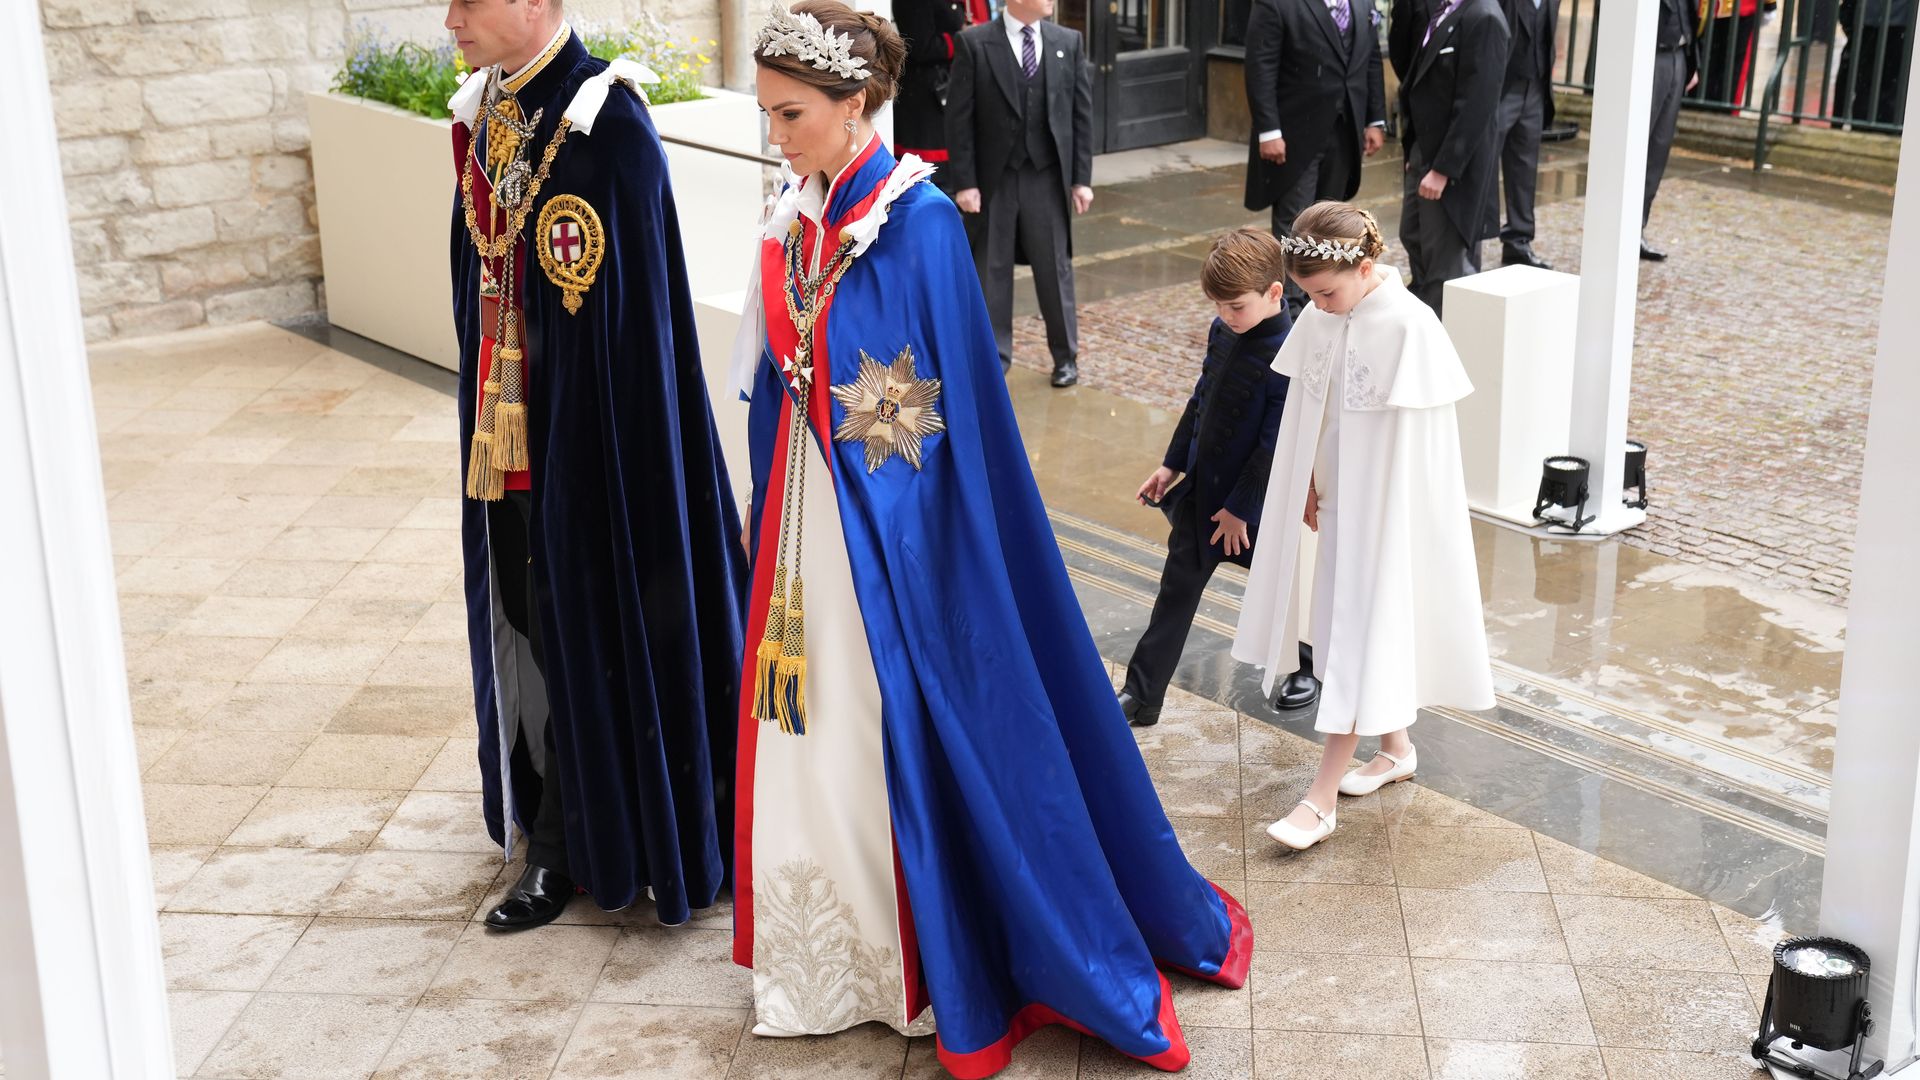 Catherine, Princess of Wales arrives ahead of the Coronation of King Charles III and Queen Camilla on May 6, 2023 in Alexander McQueen gown